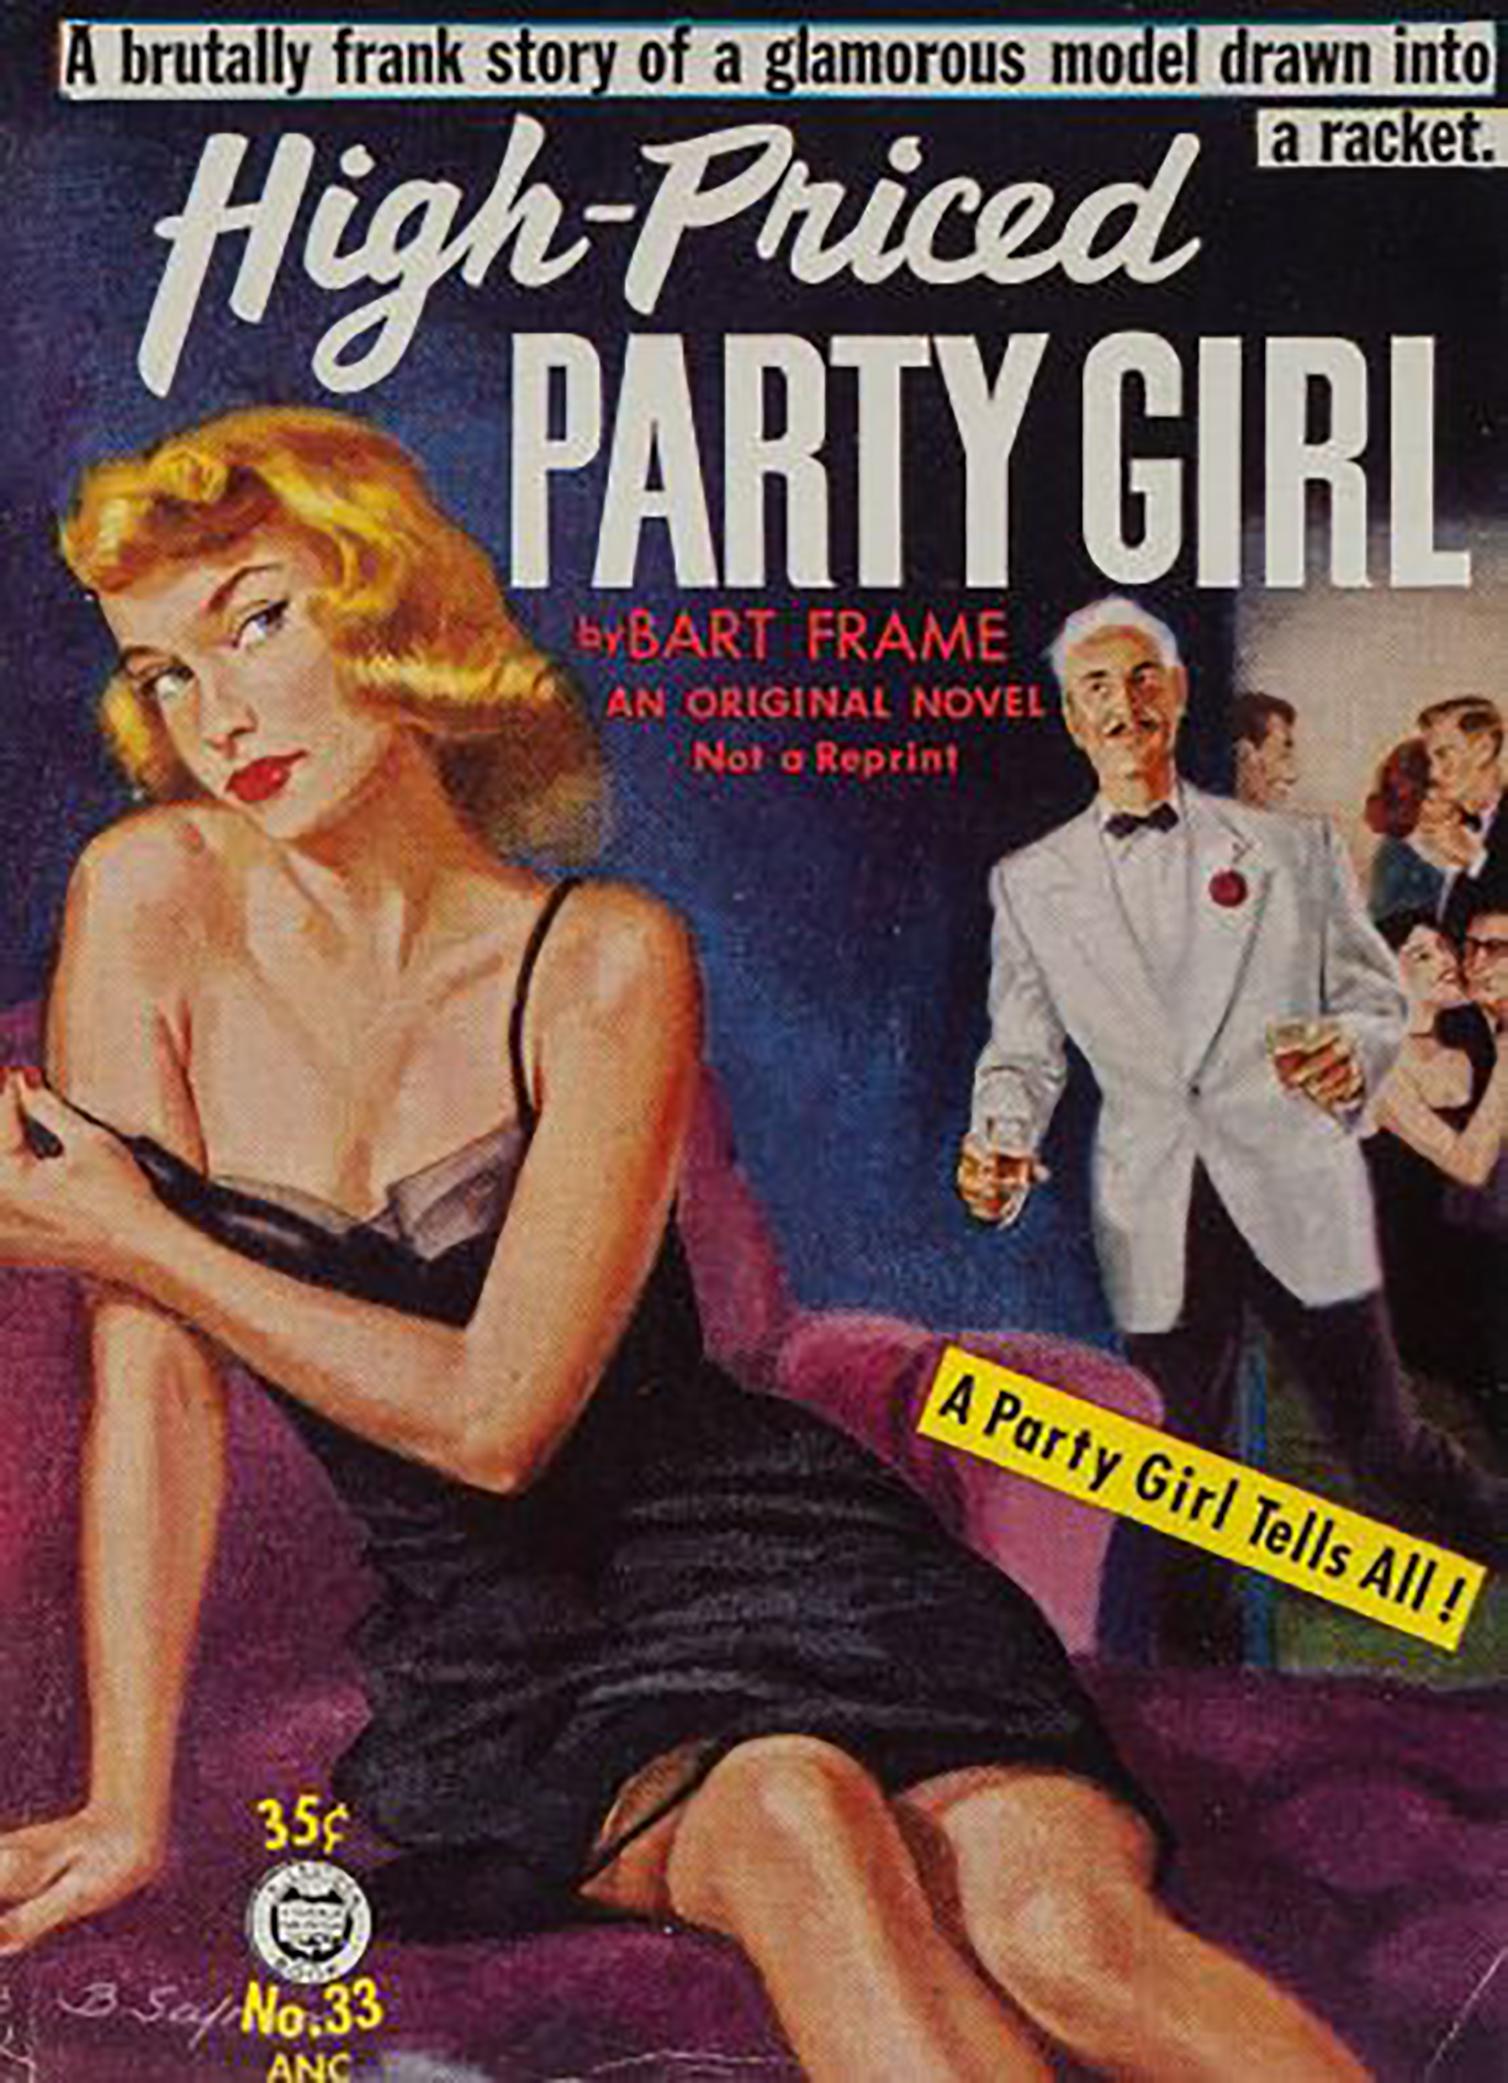 Medium: Oil on Canvasboard
Signature: Signed Lower Left

This illustration was published as the paperback cover of High Priced Party Girl by Bart Frame, A Croydon Book, No. 33, 1953.